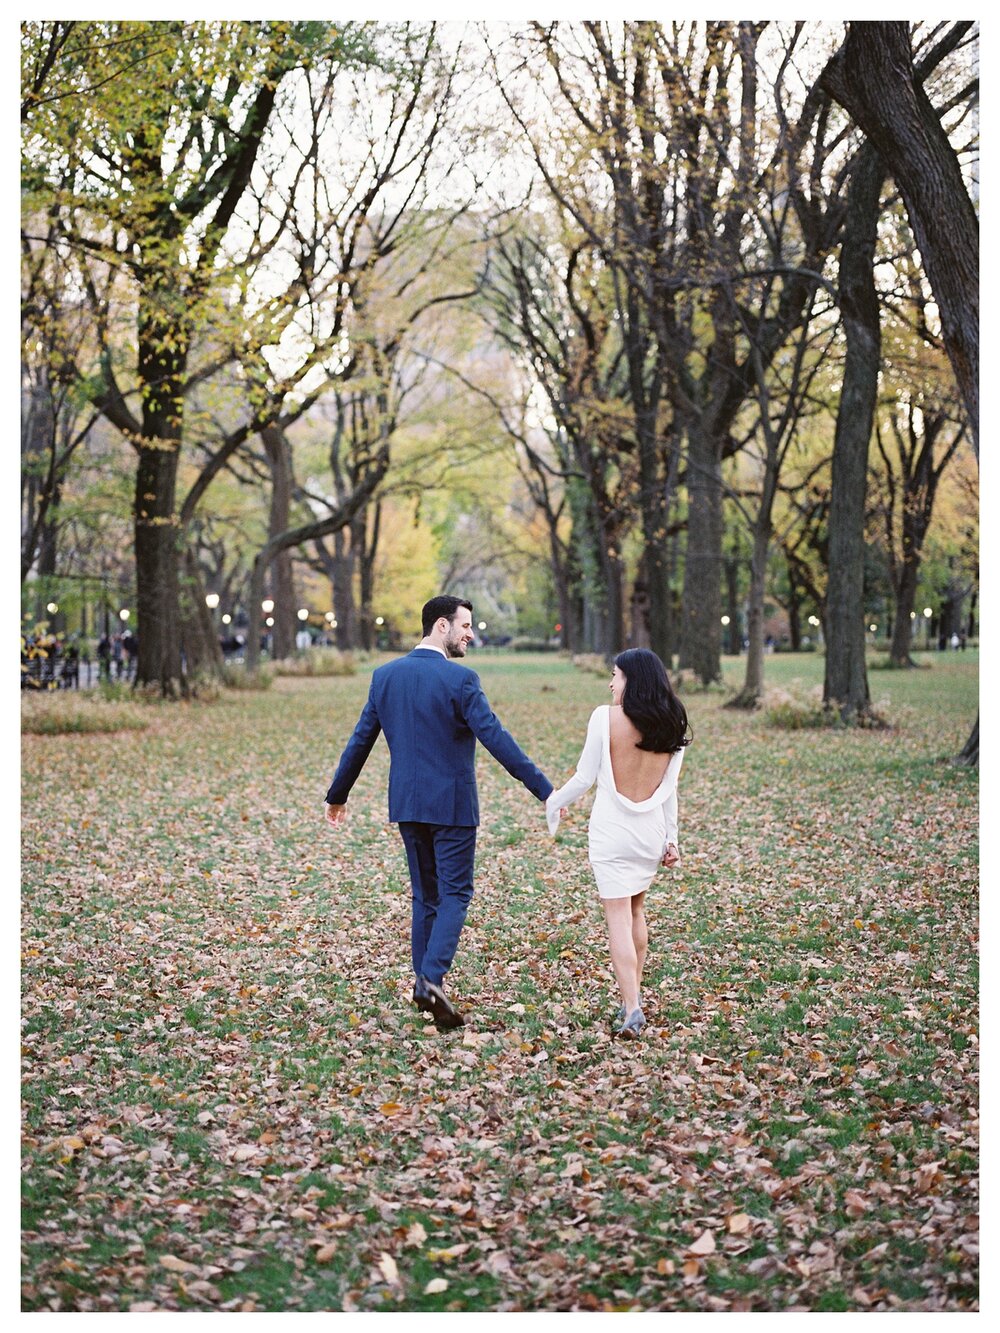  couple walking on the leaves fall in central park 